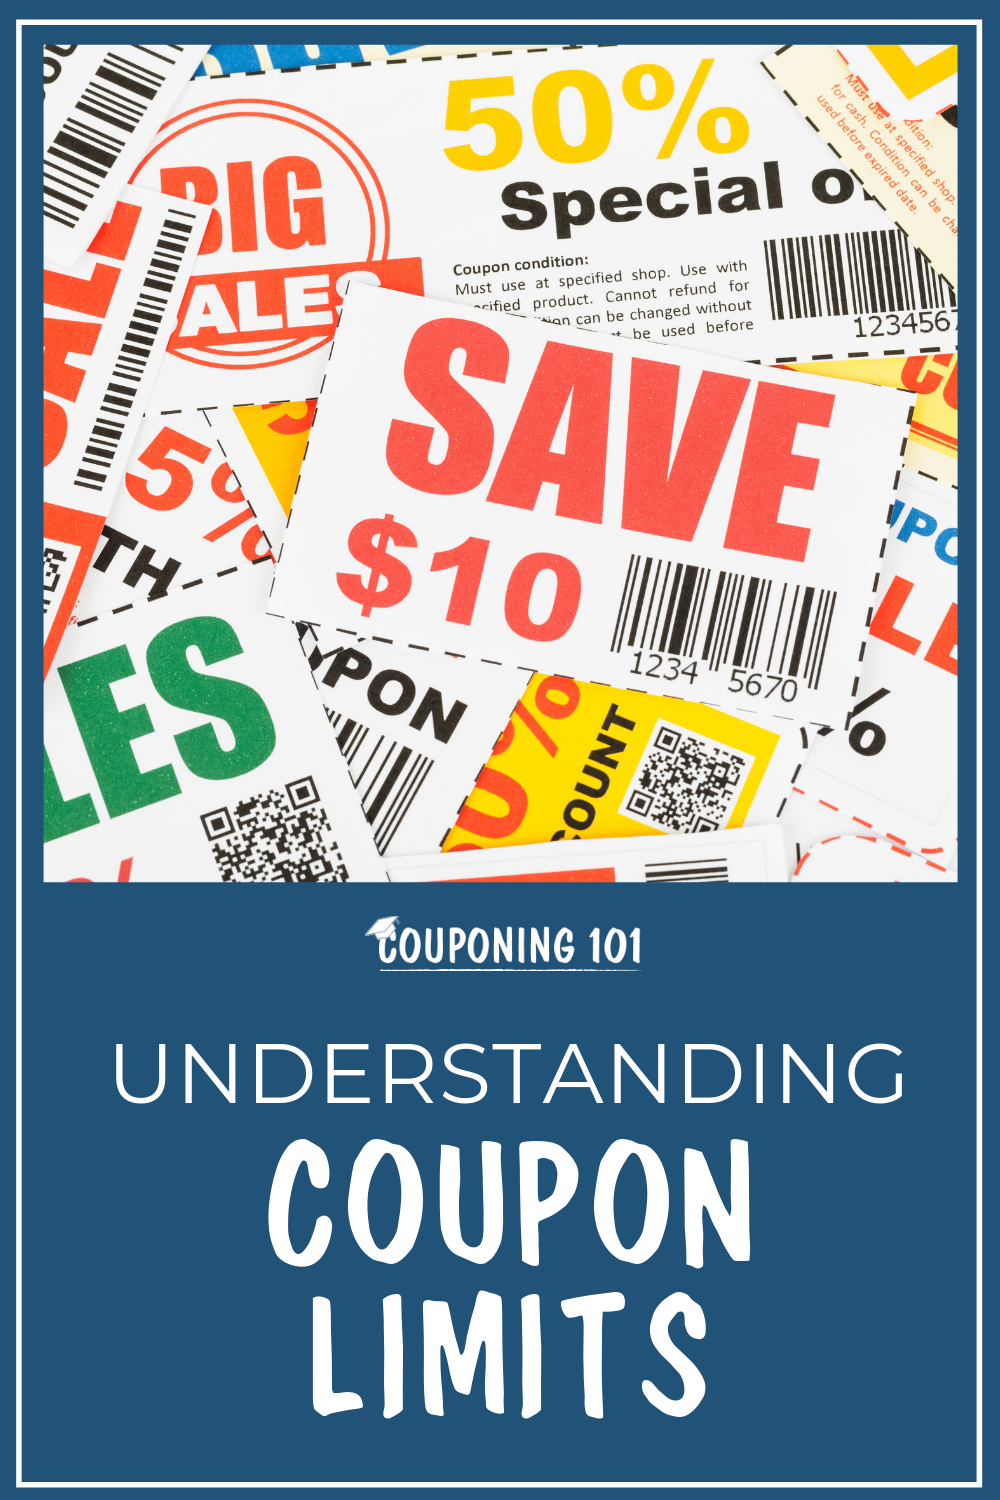 Understanding Coupon Limits (One Coupon Per Item!) Couponing 101